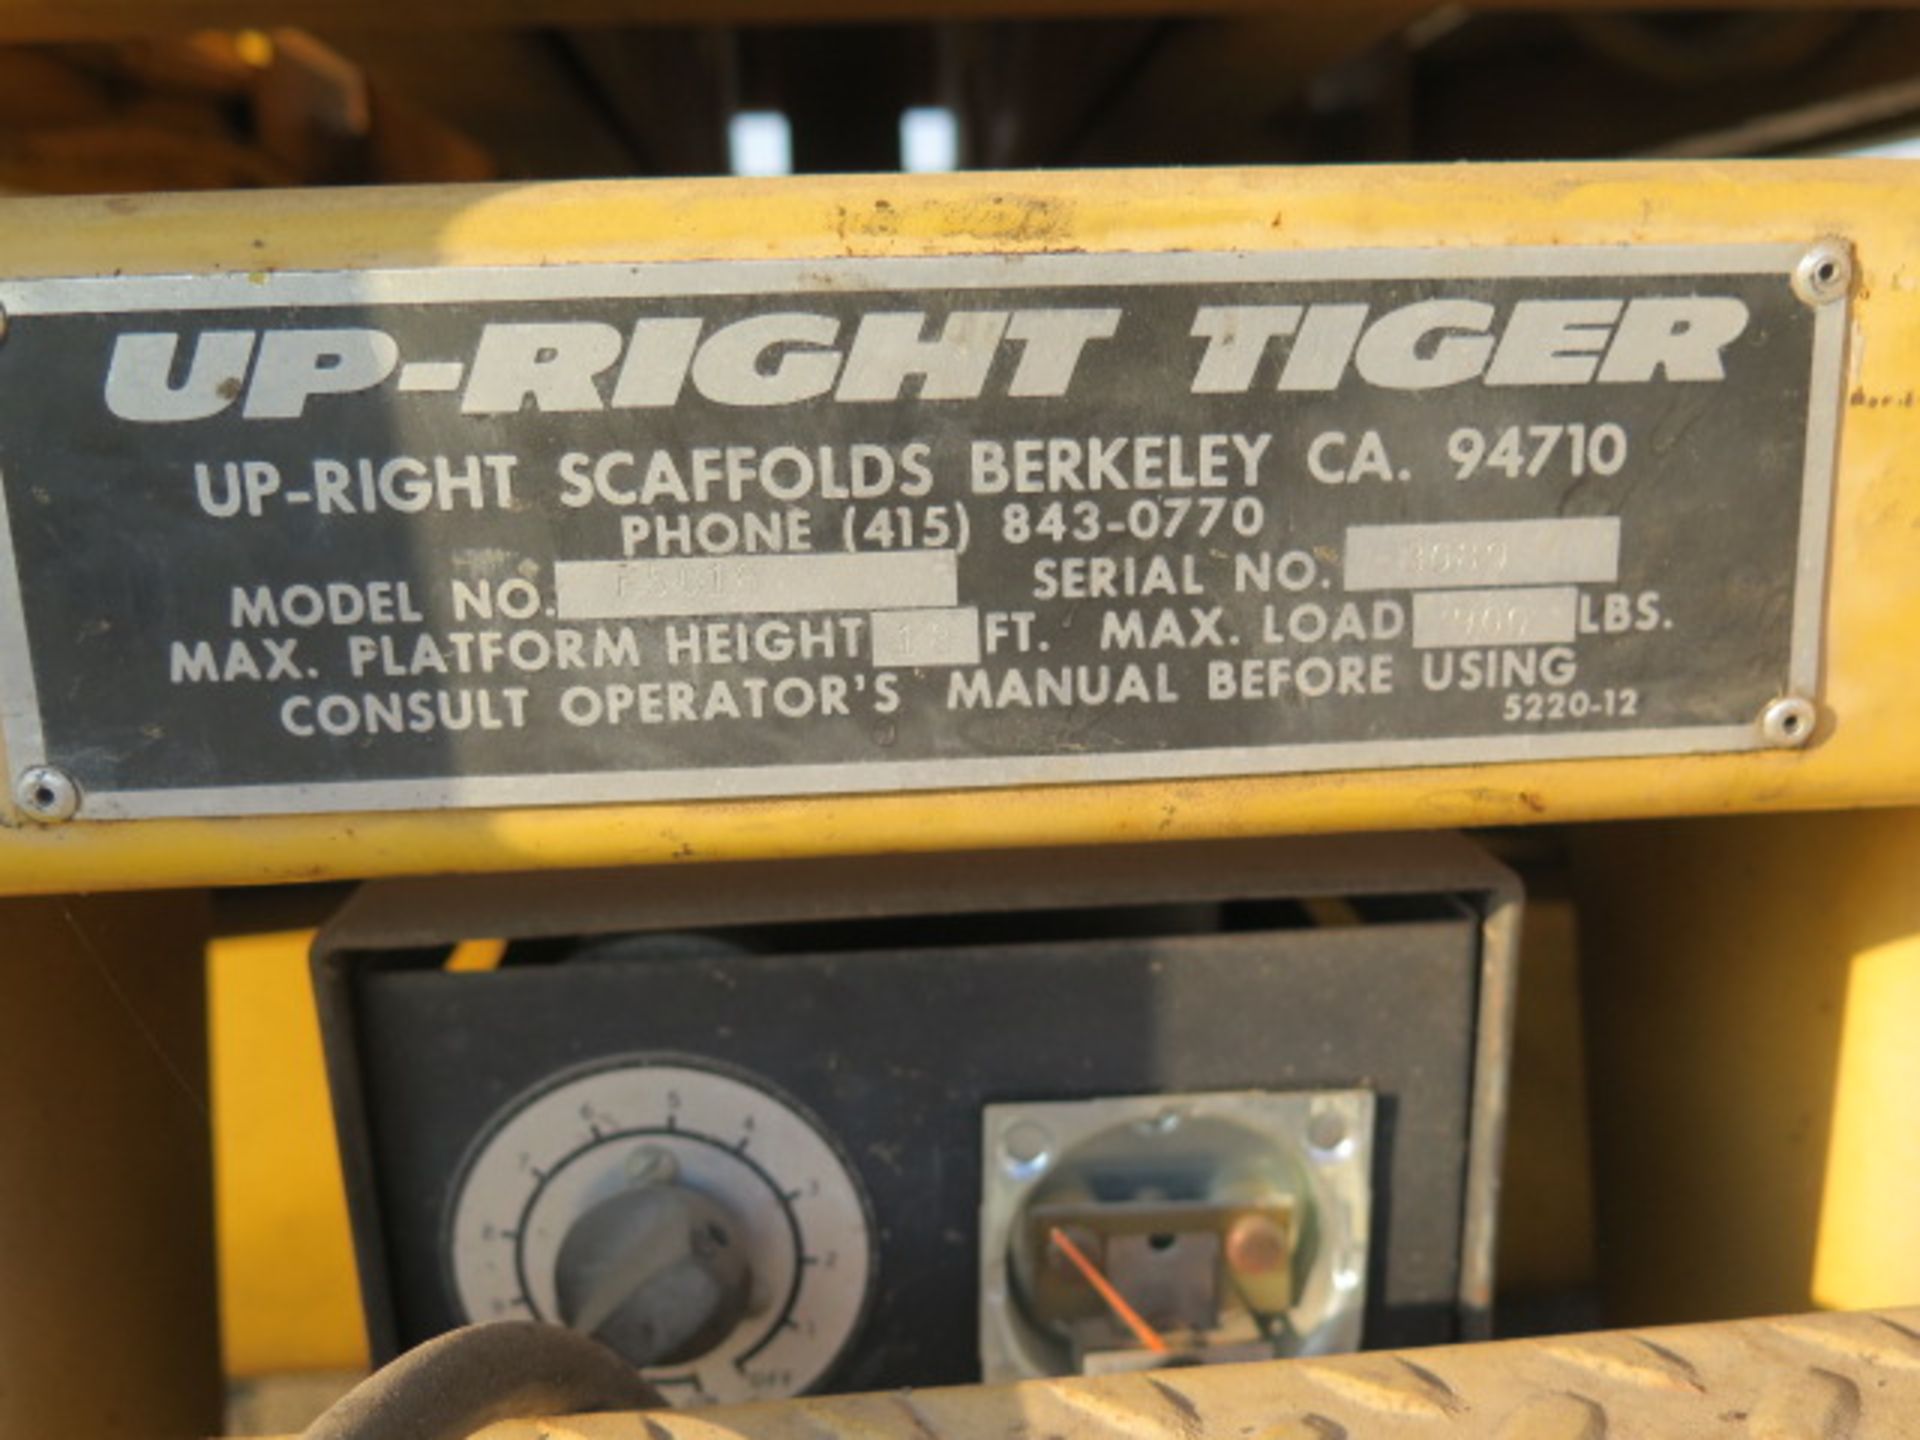 Up-Right Tiger Electric Scissor Platform Lift (SOLD AS-IS - NO WARRANTY) - Image 7 of 7